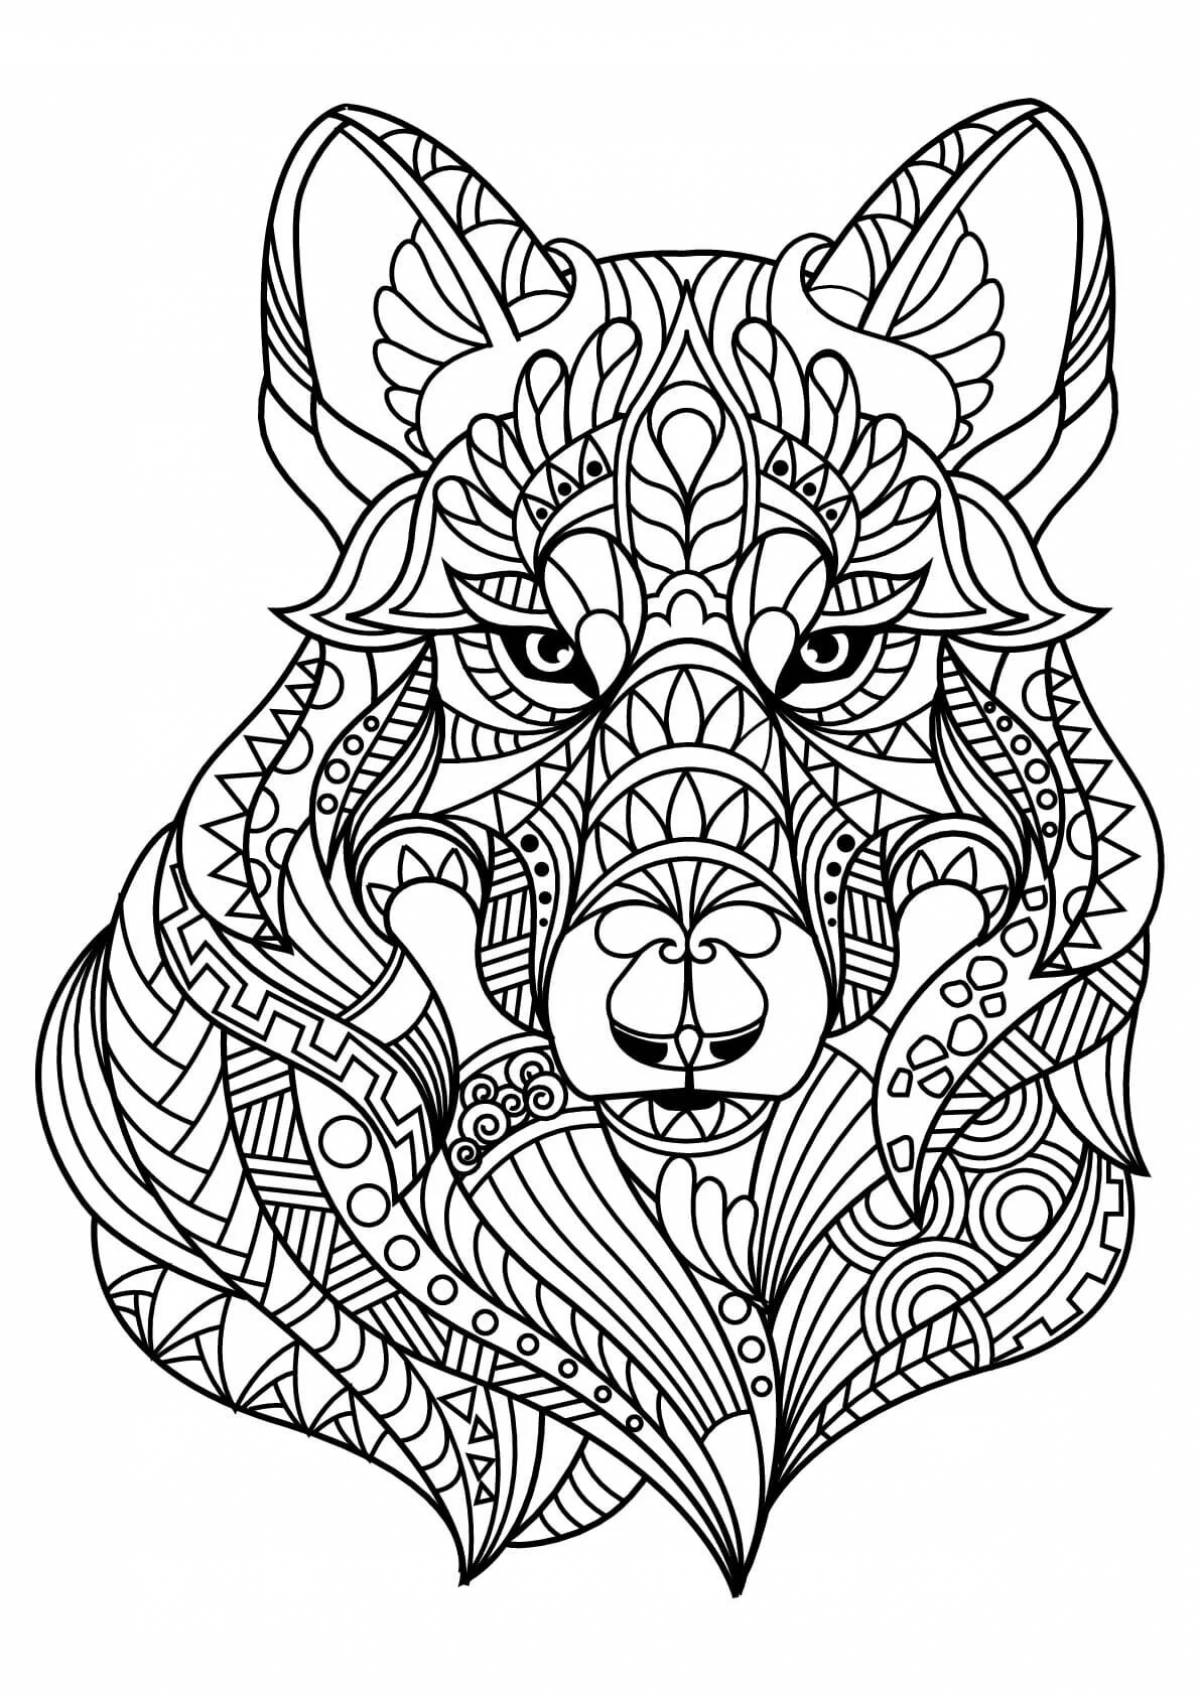 Anti-stress coloring book for adults